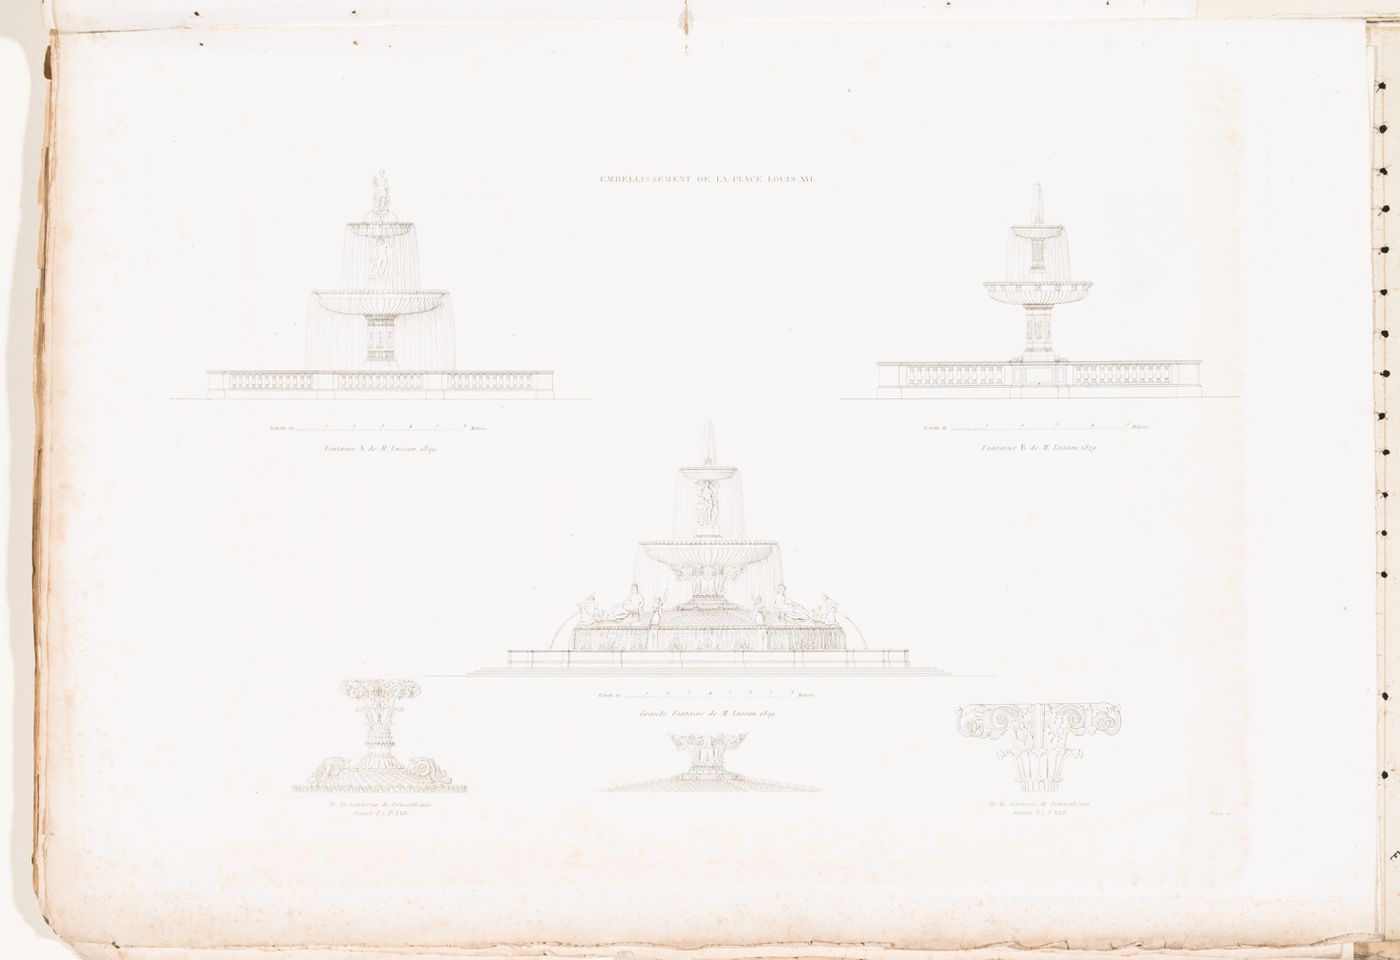 Elevations and details for fountains for place Louis XV and details of the Lanterne de Démosthénes, Athens